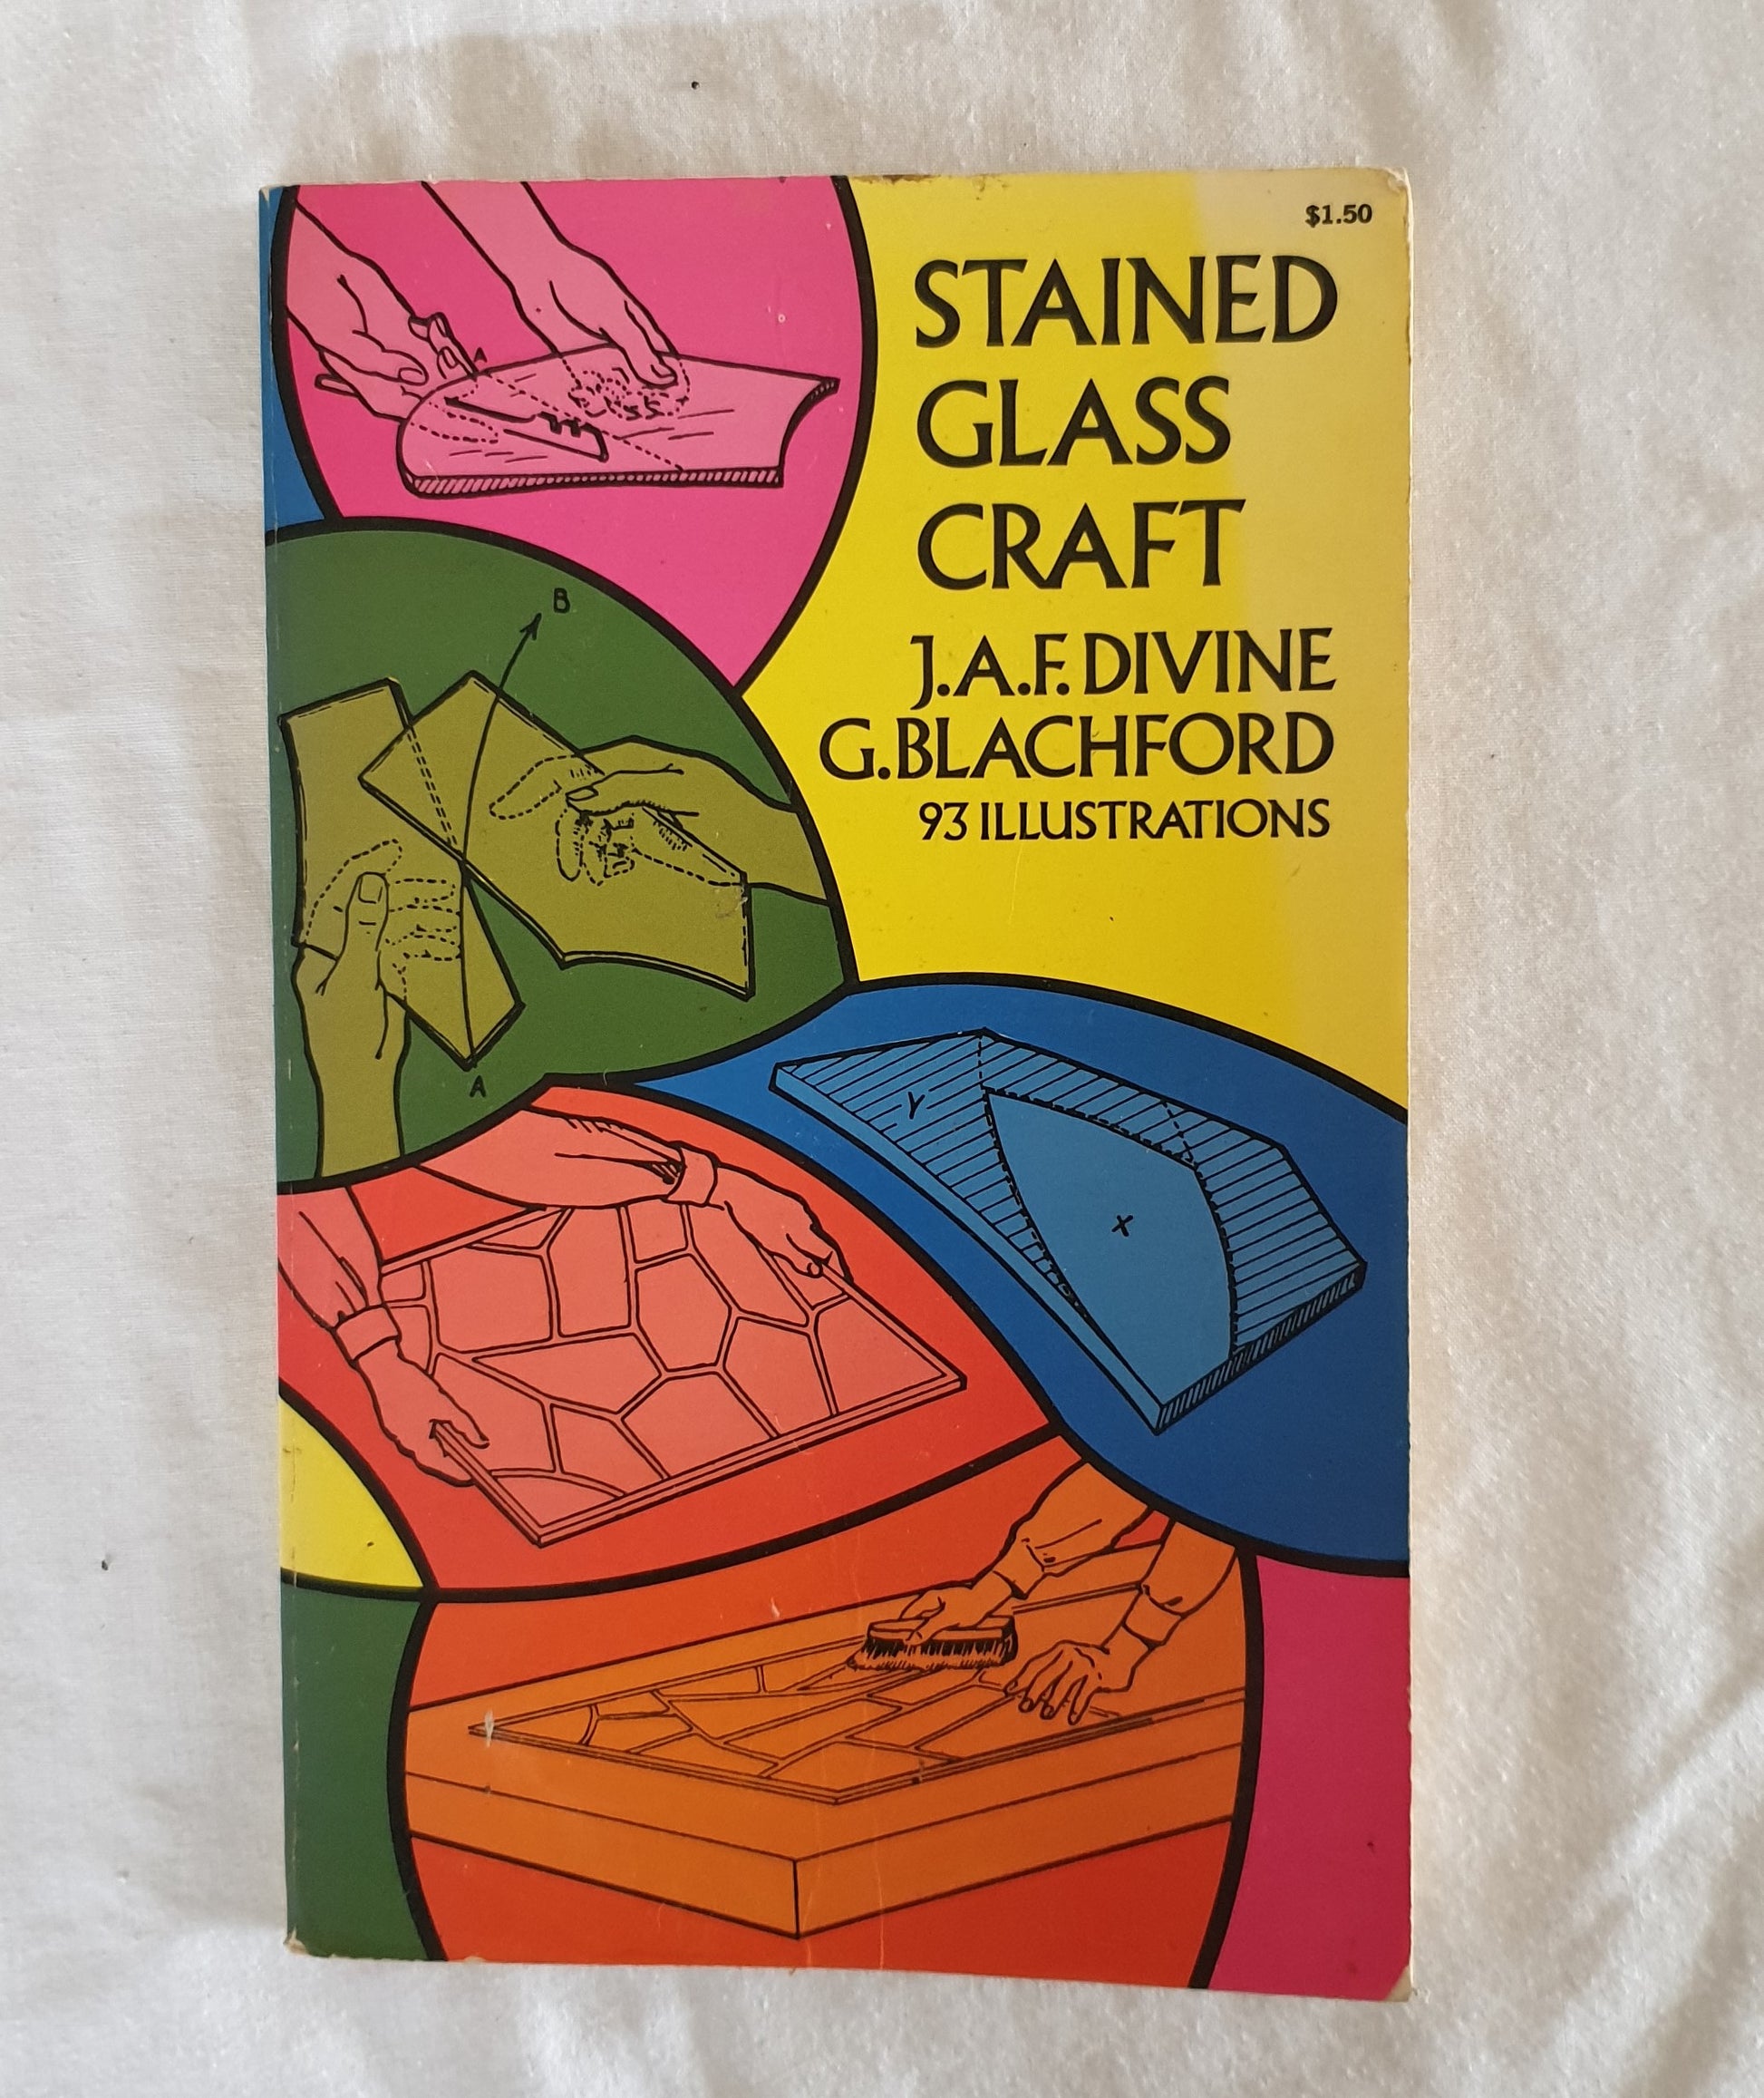 Stained Glass Craft  by J. A. F. Divine and G. Blachford